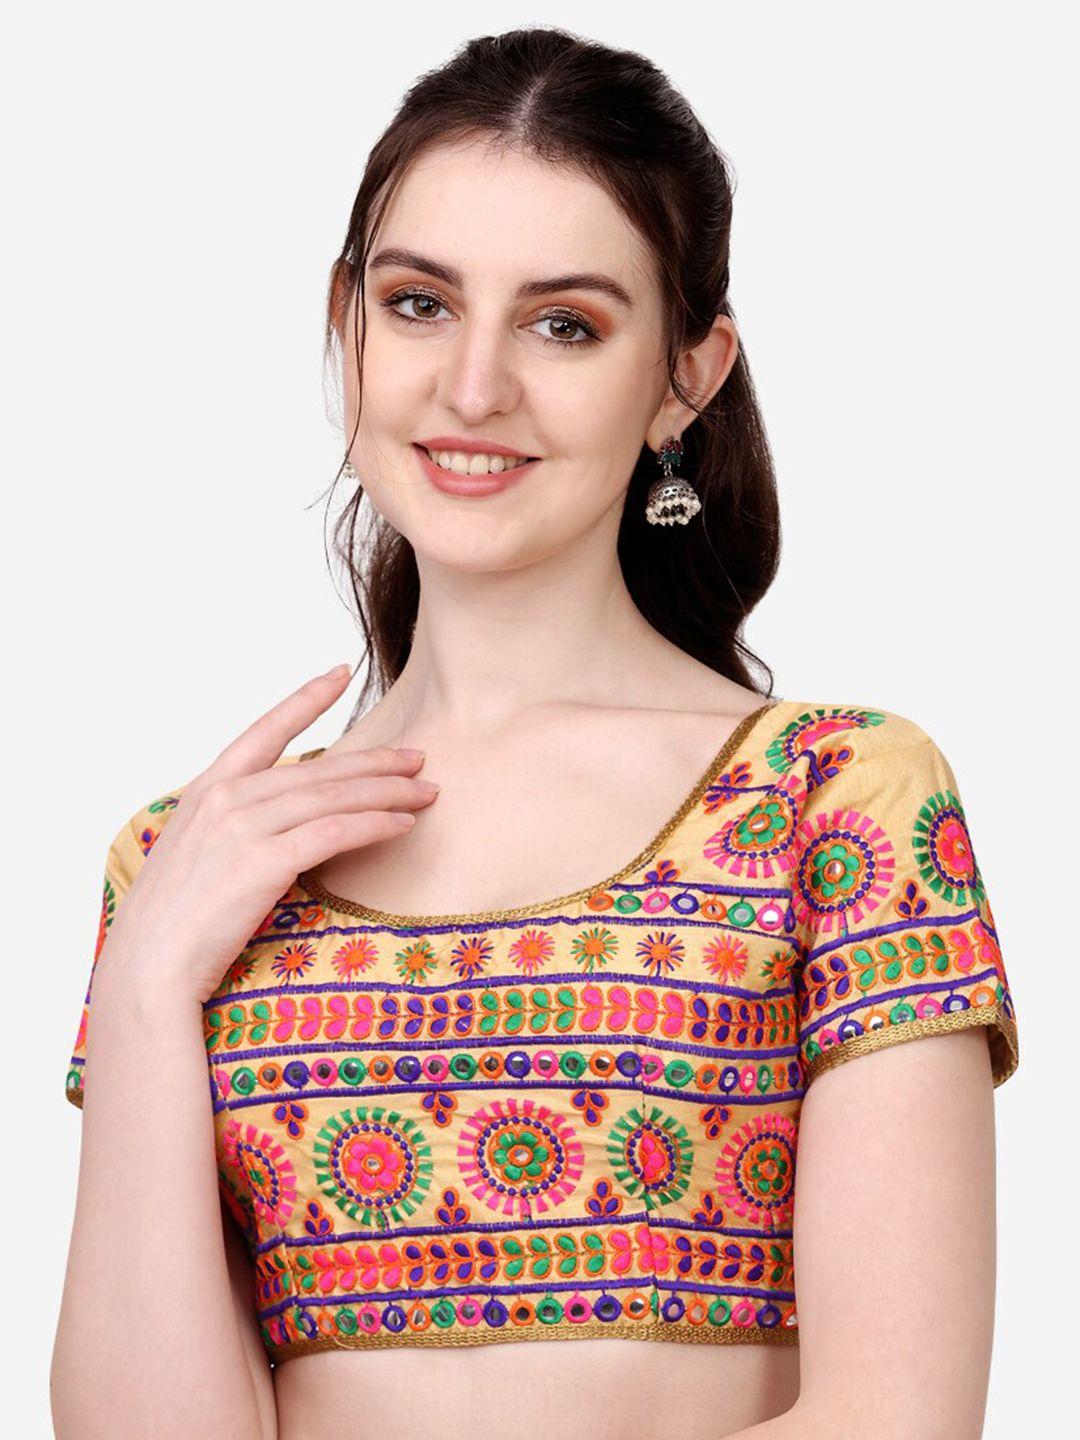 pujia mills golden & pink embroidered silk saree blouse